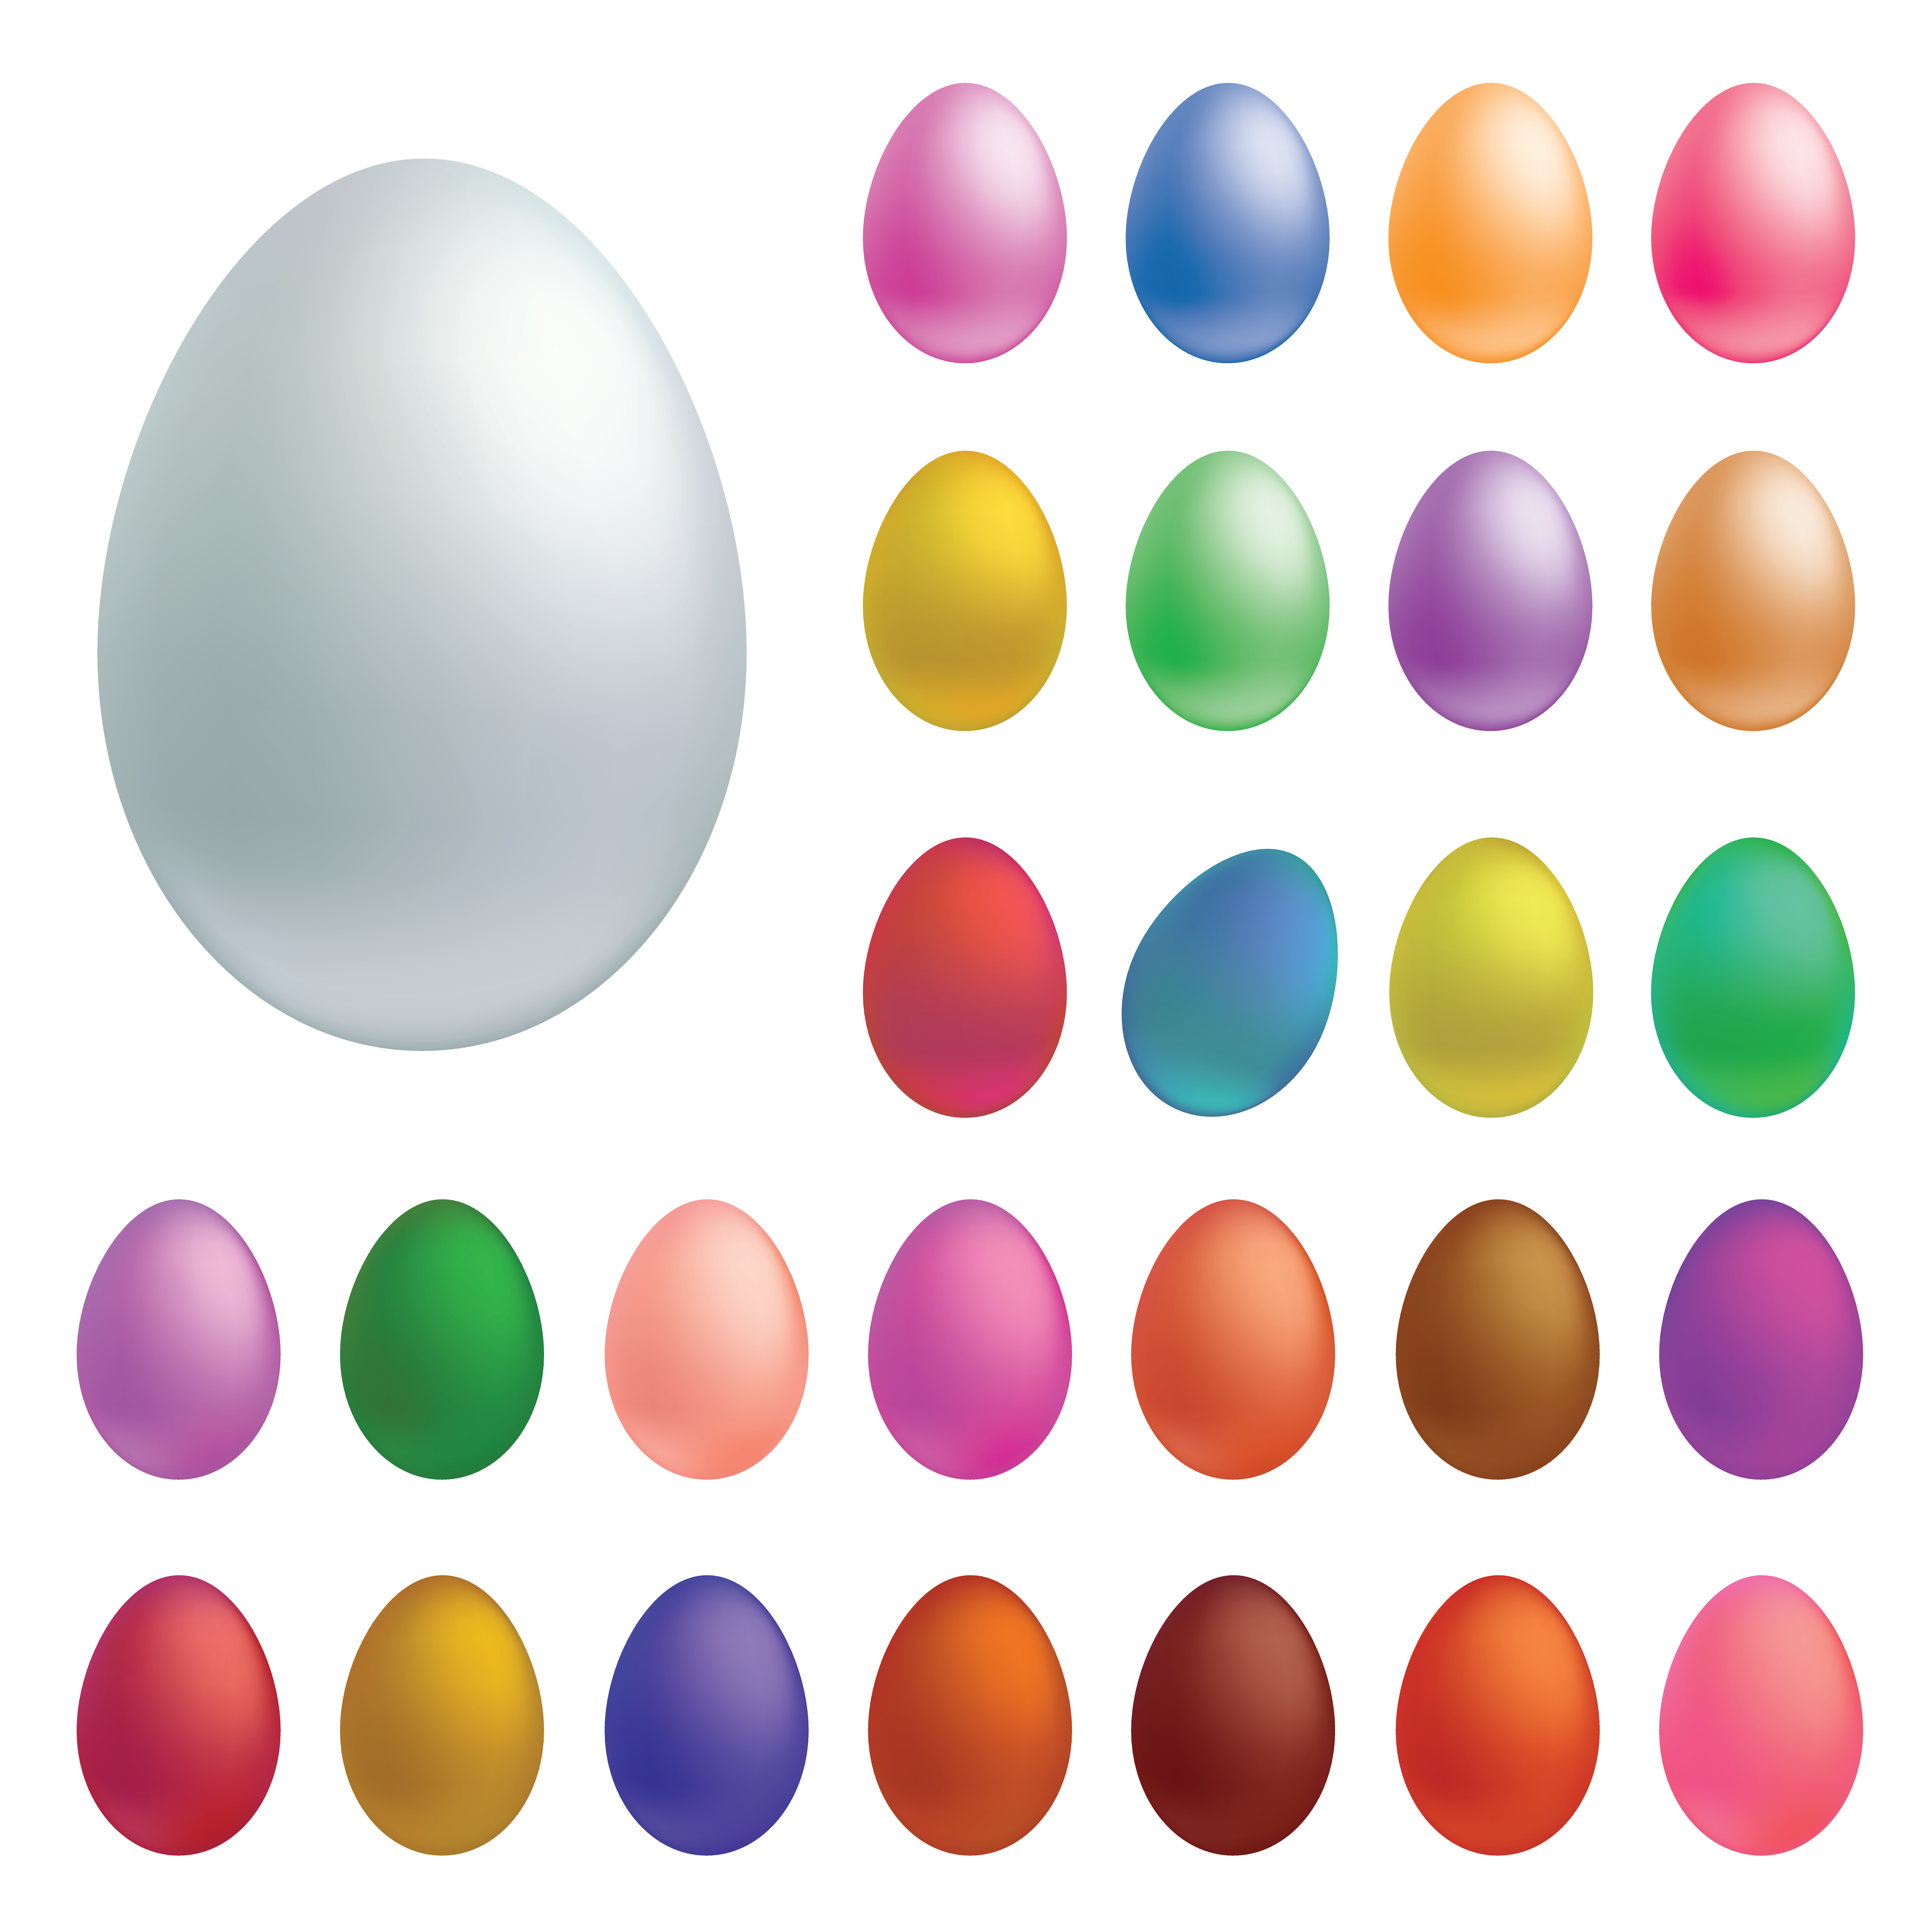 Free Easter Eggs Free Vector / 4Vector